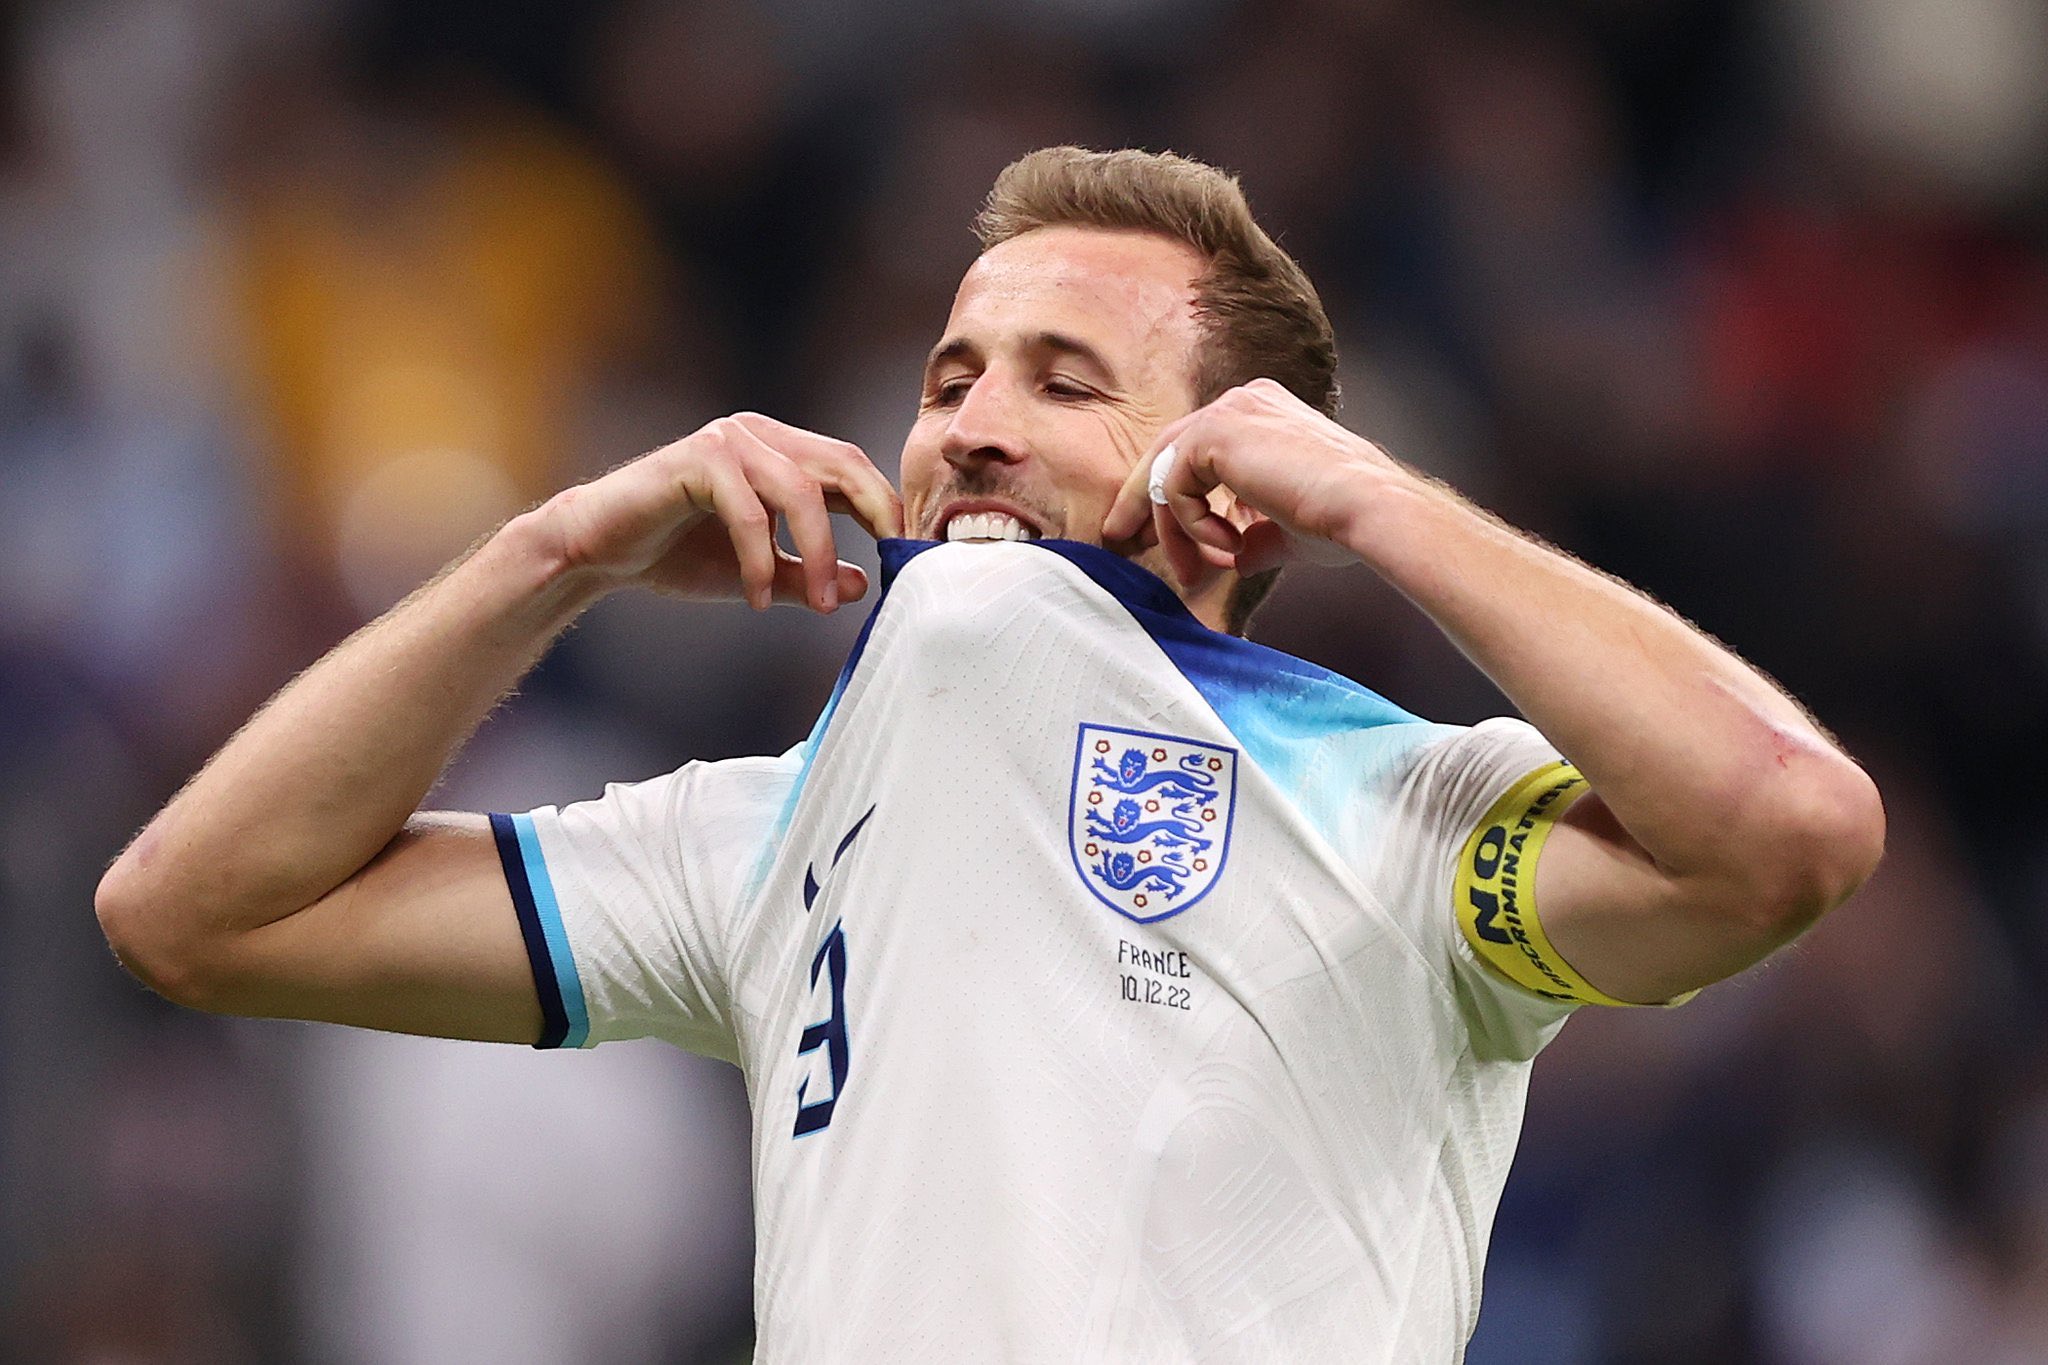 Harry Kane’s trophy draught continues as England are knocked out of the FIFA World Cup 2022 by France